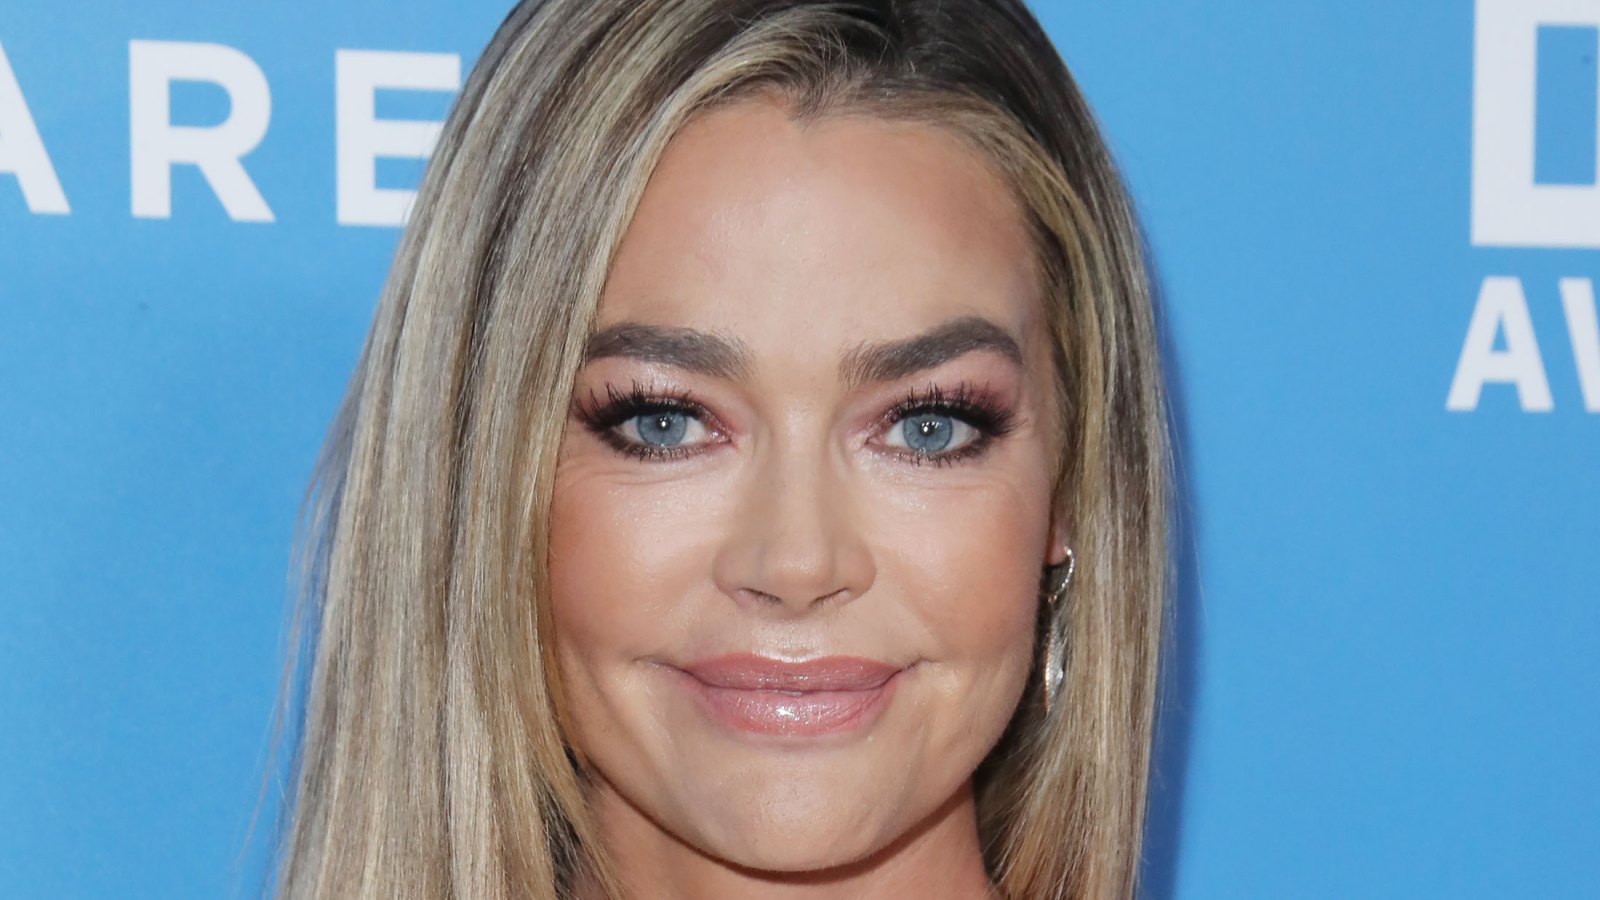 Denise Richards Gets Heated With a Producer in Unaired ‘RHOBH’ Scene